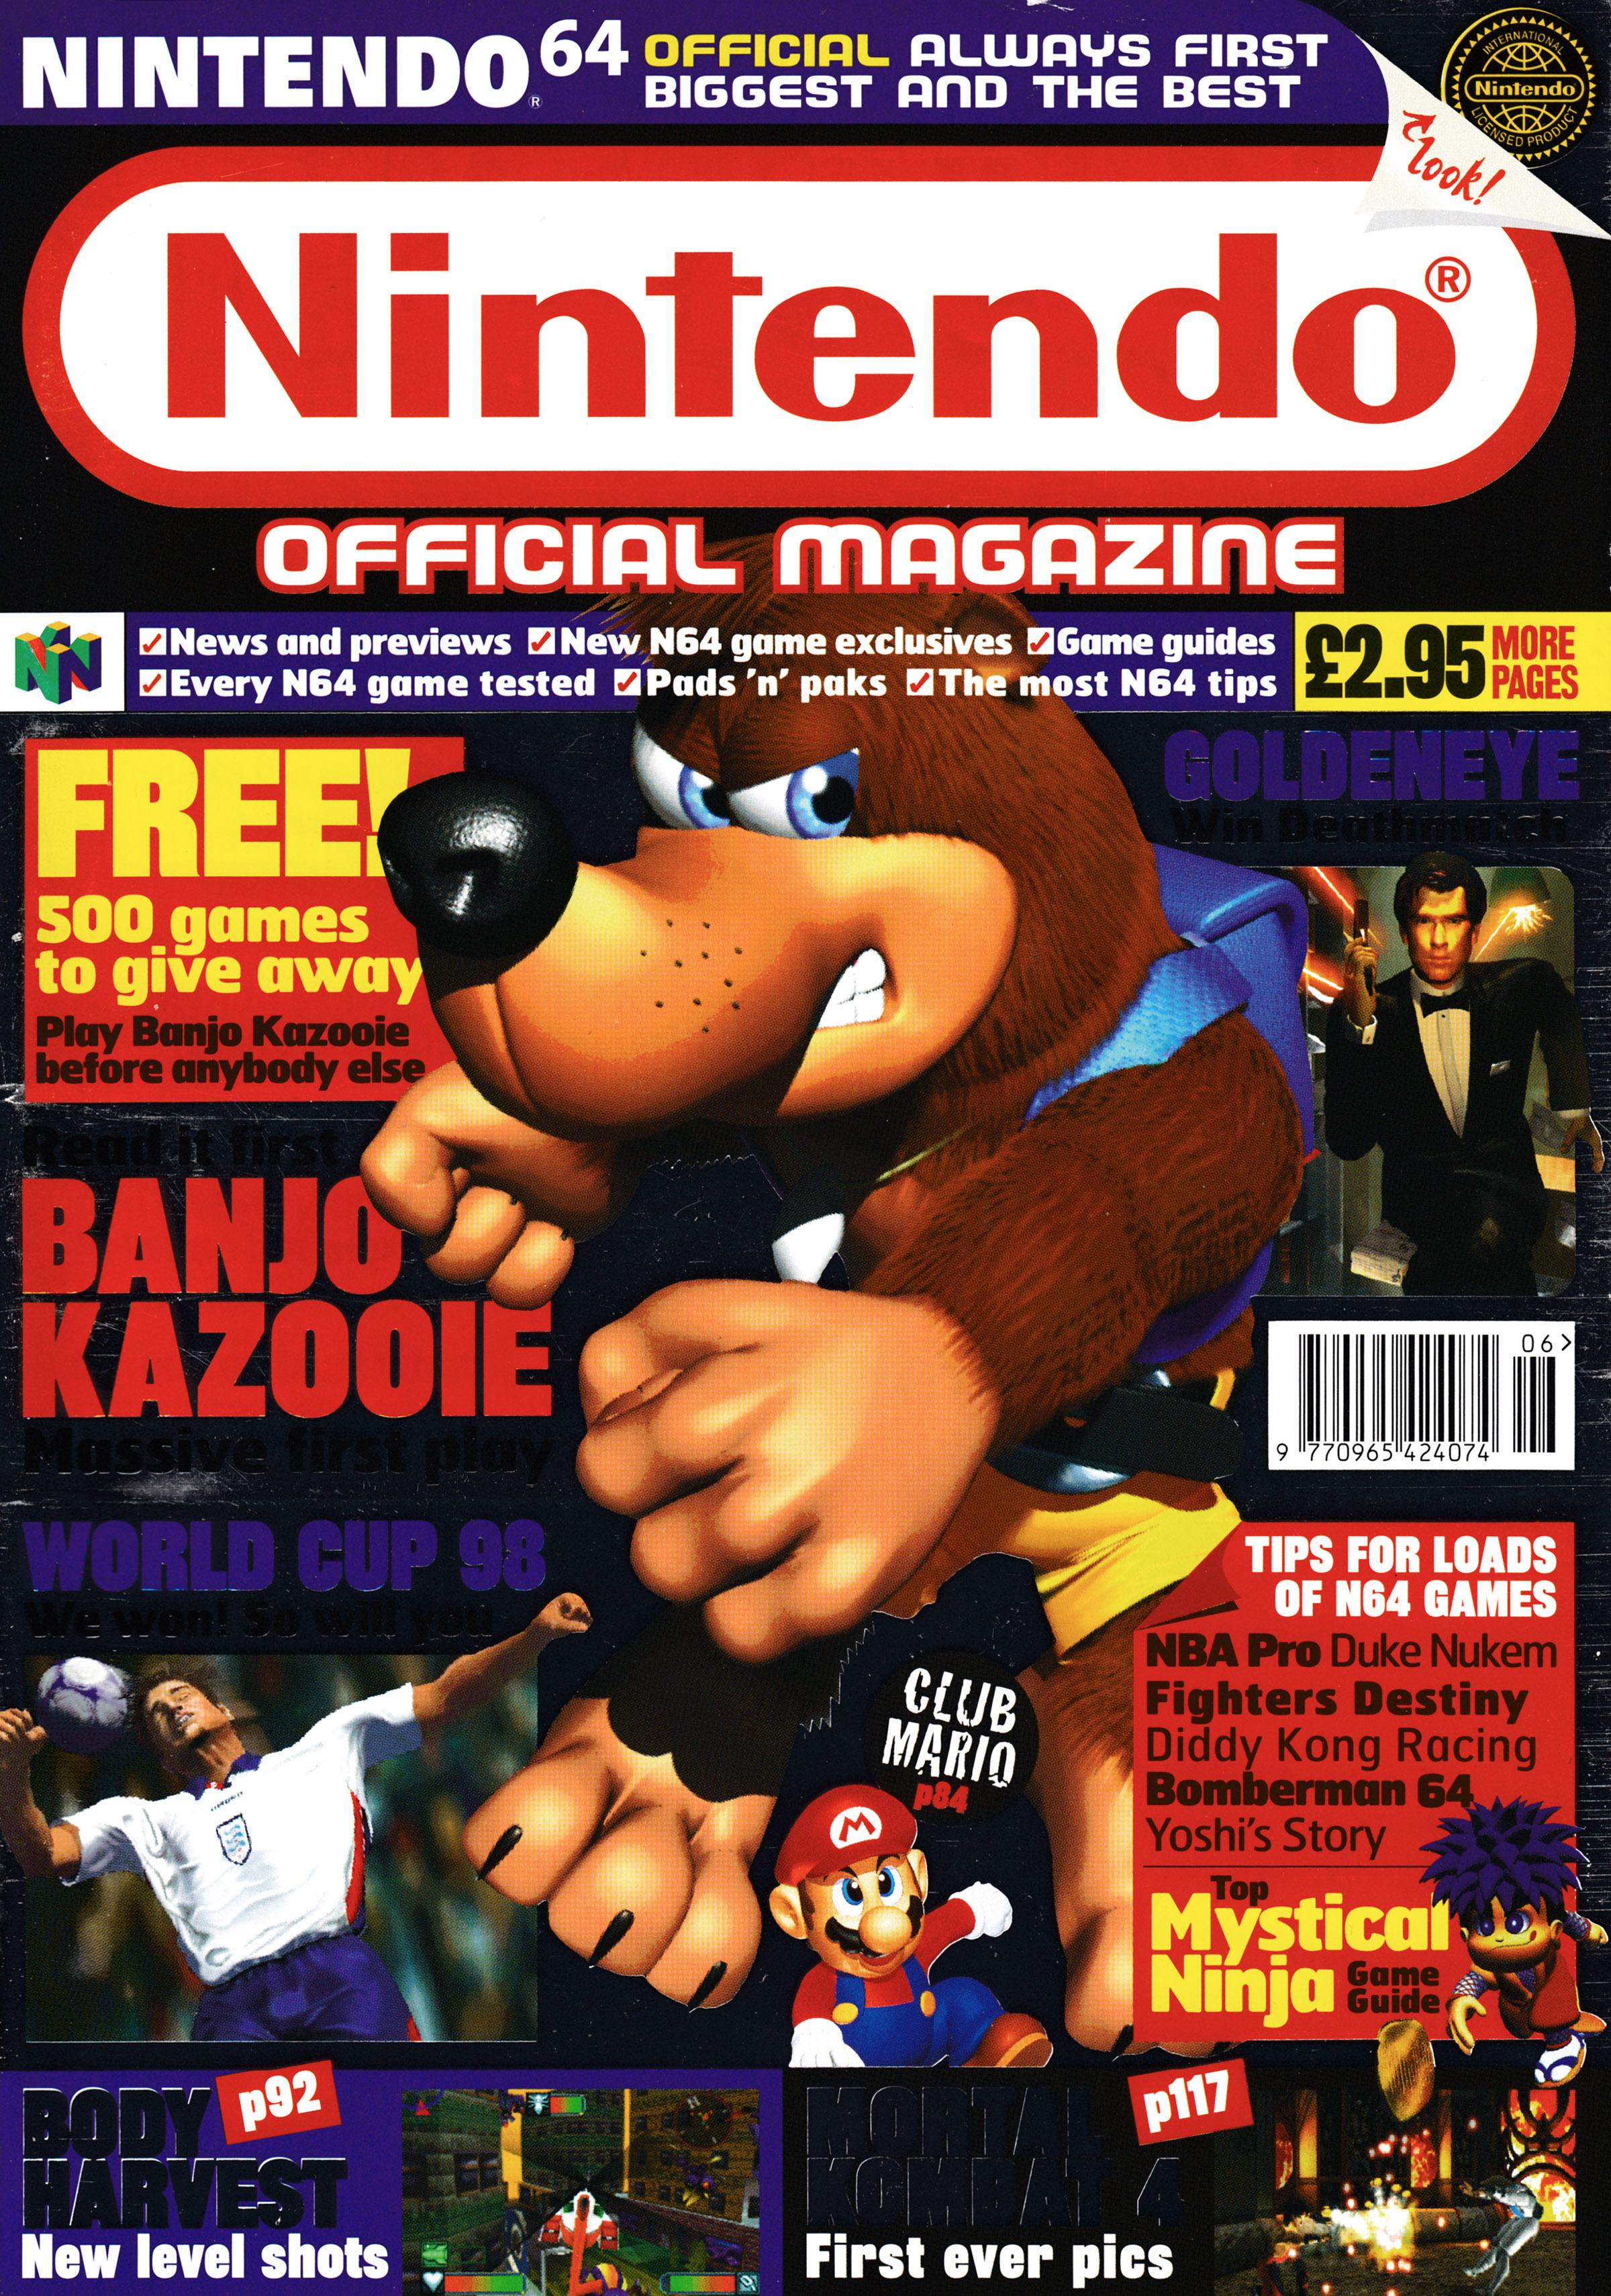 Banjo-Kazooie Offical Player's Guide by Nintendo